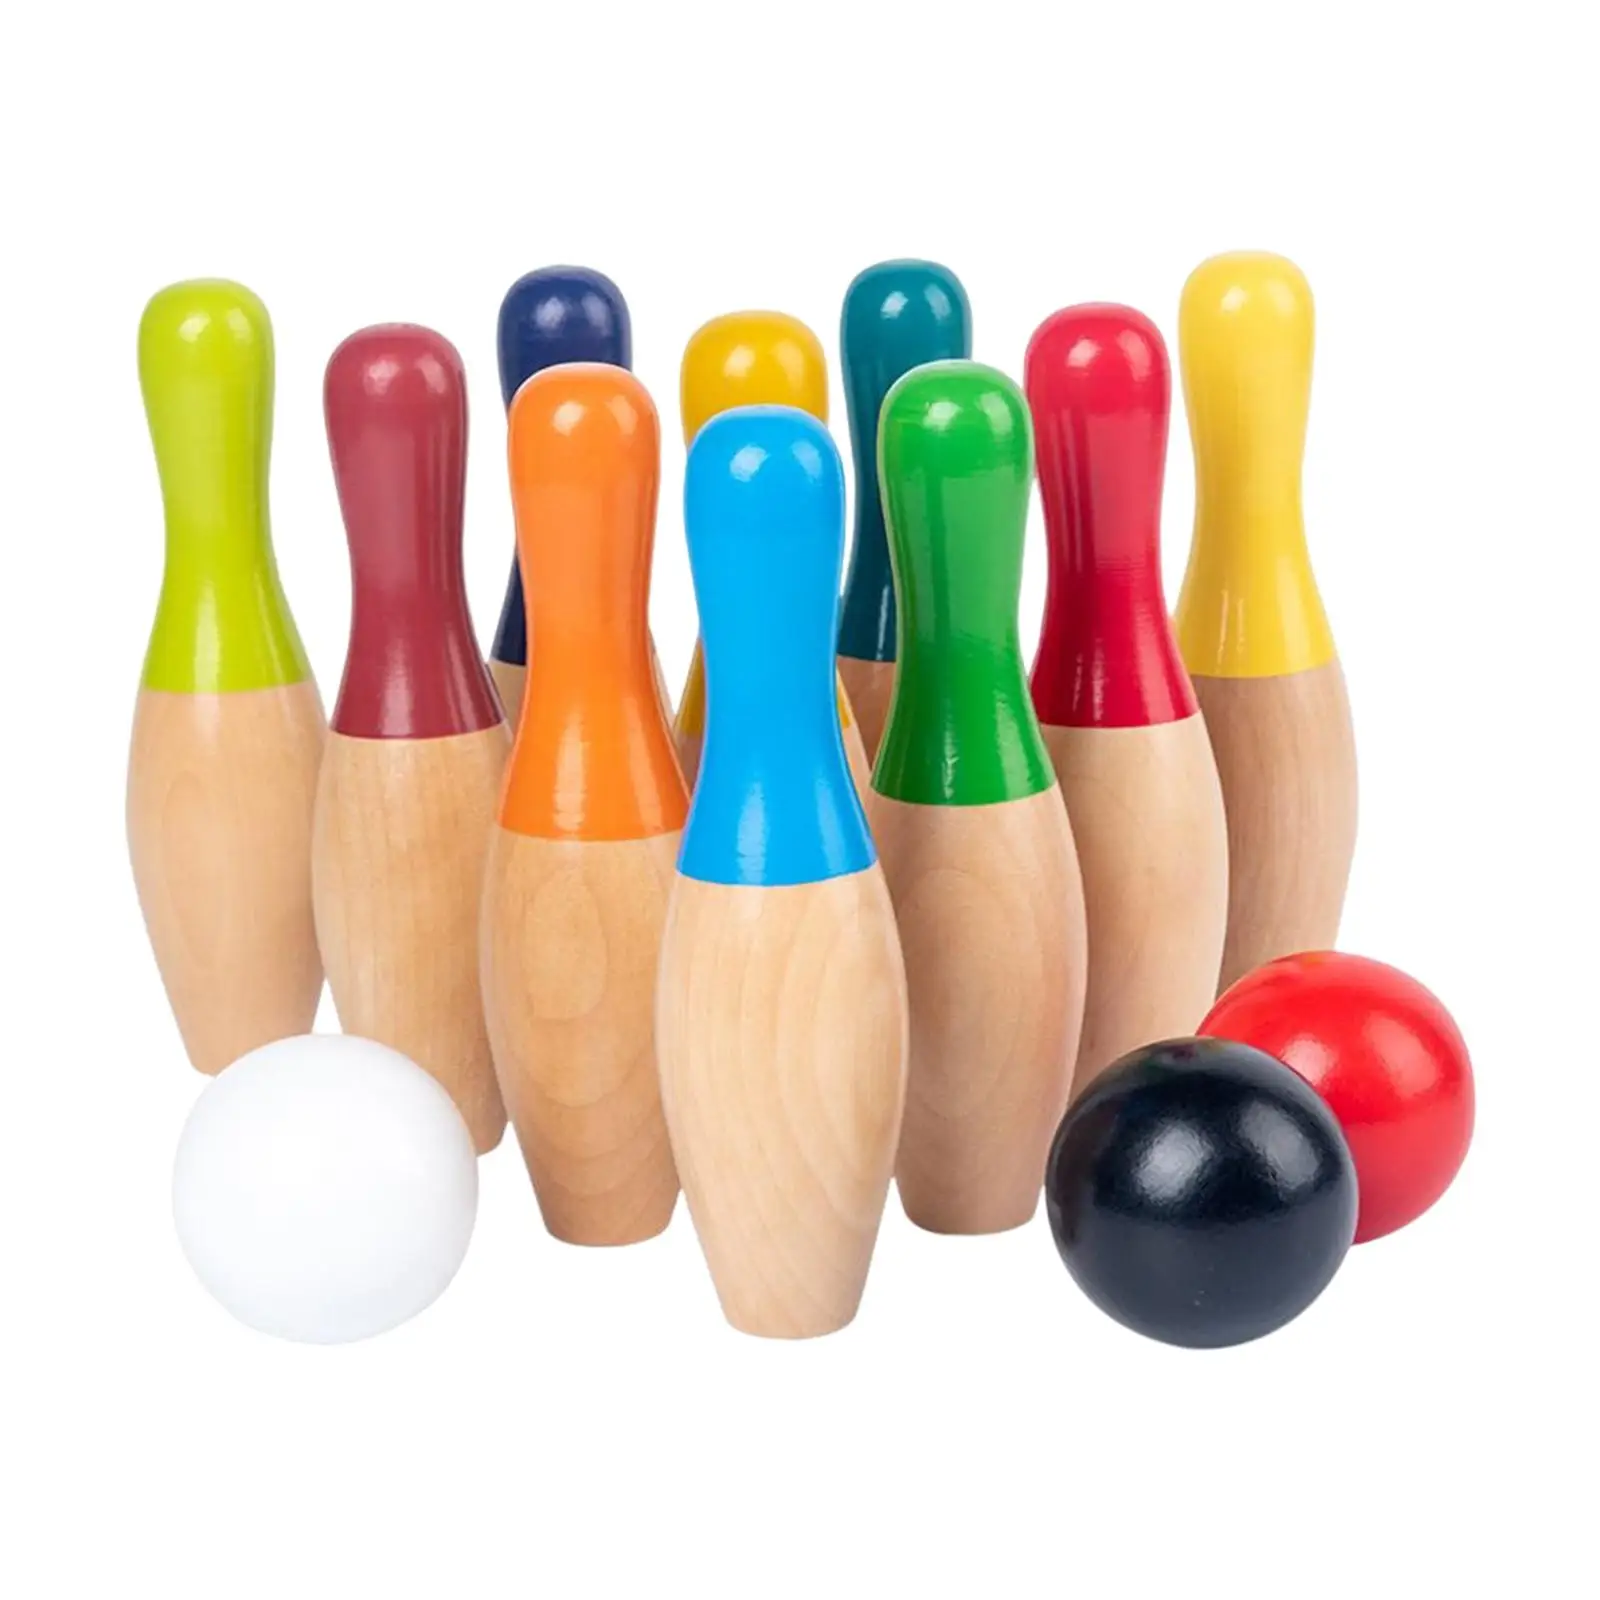 Early Development Wood Bowling Set Skittles Toys Educational 10 Bottles Outdoor Wood Bowling Game for Baby Toddlers Lawn Gifts